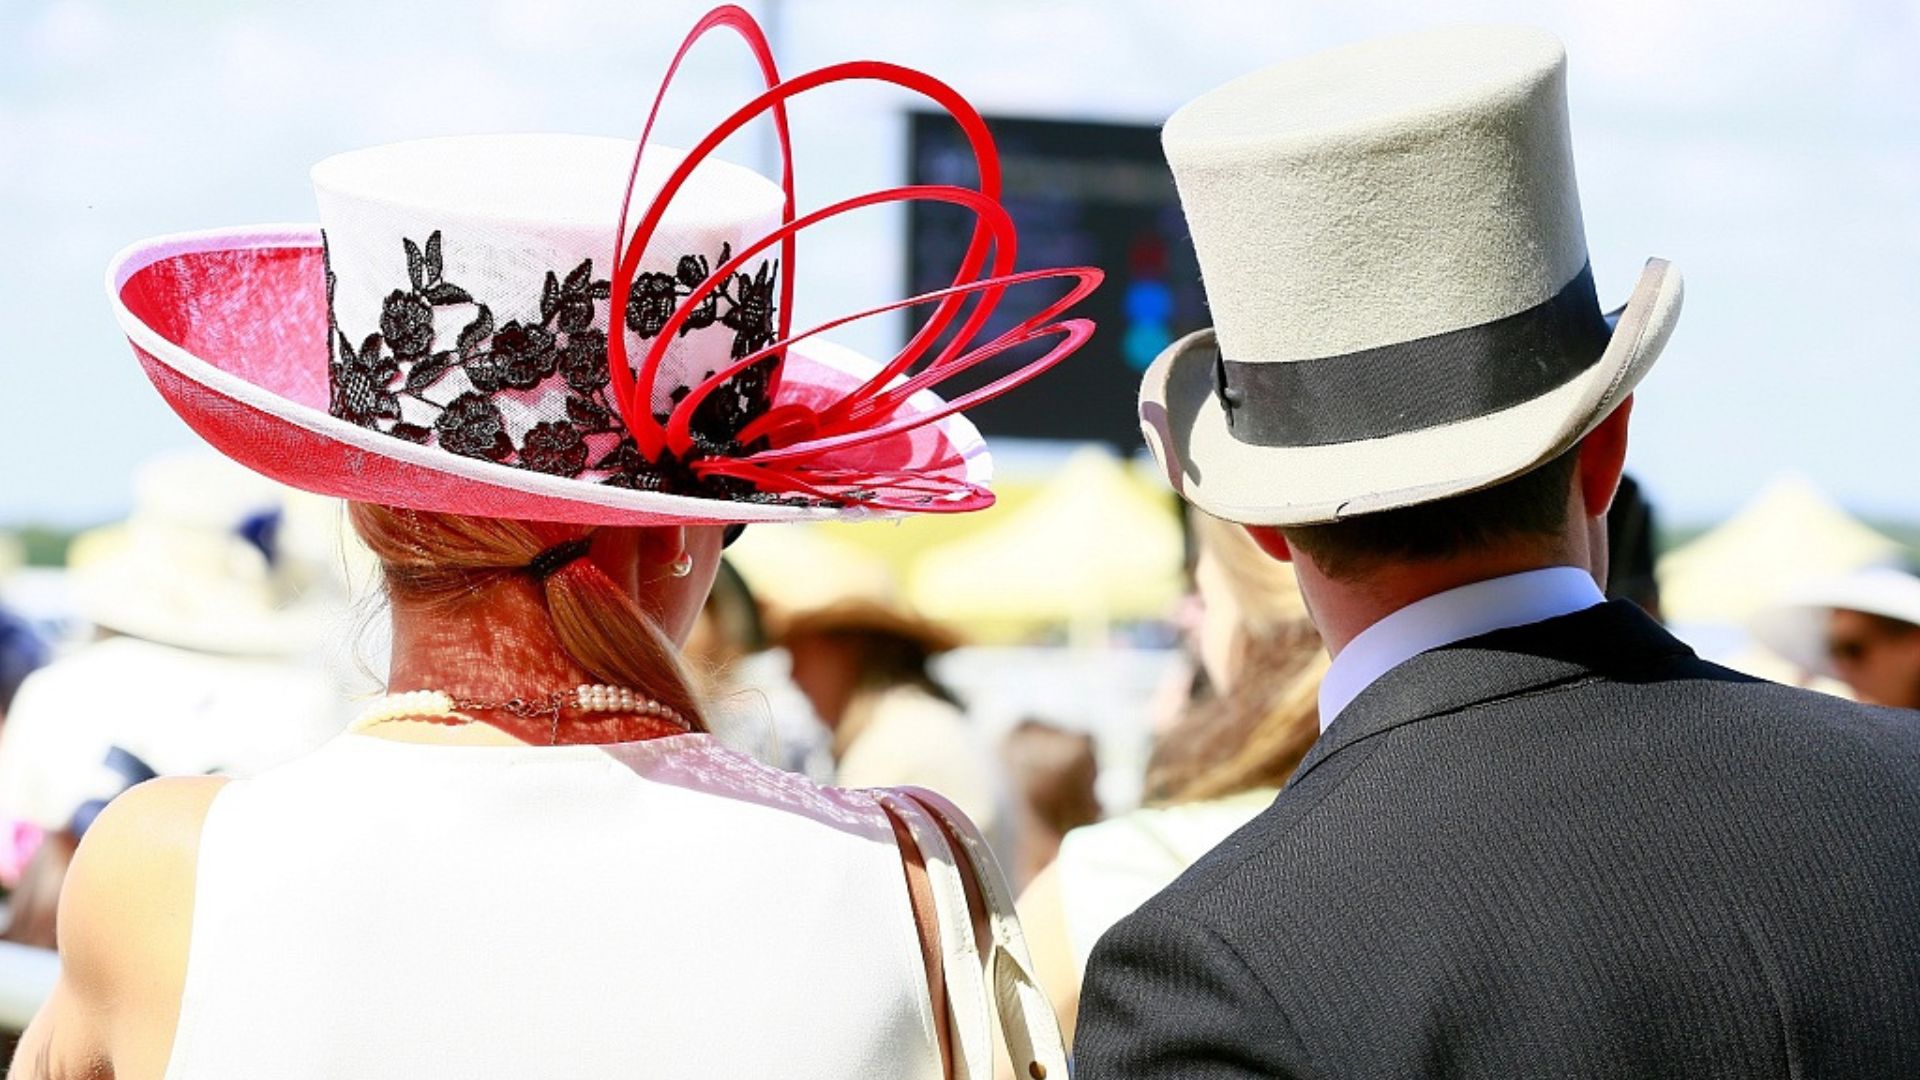 Hats can be a social signifier – and they can also give you some space. /CFP